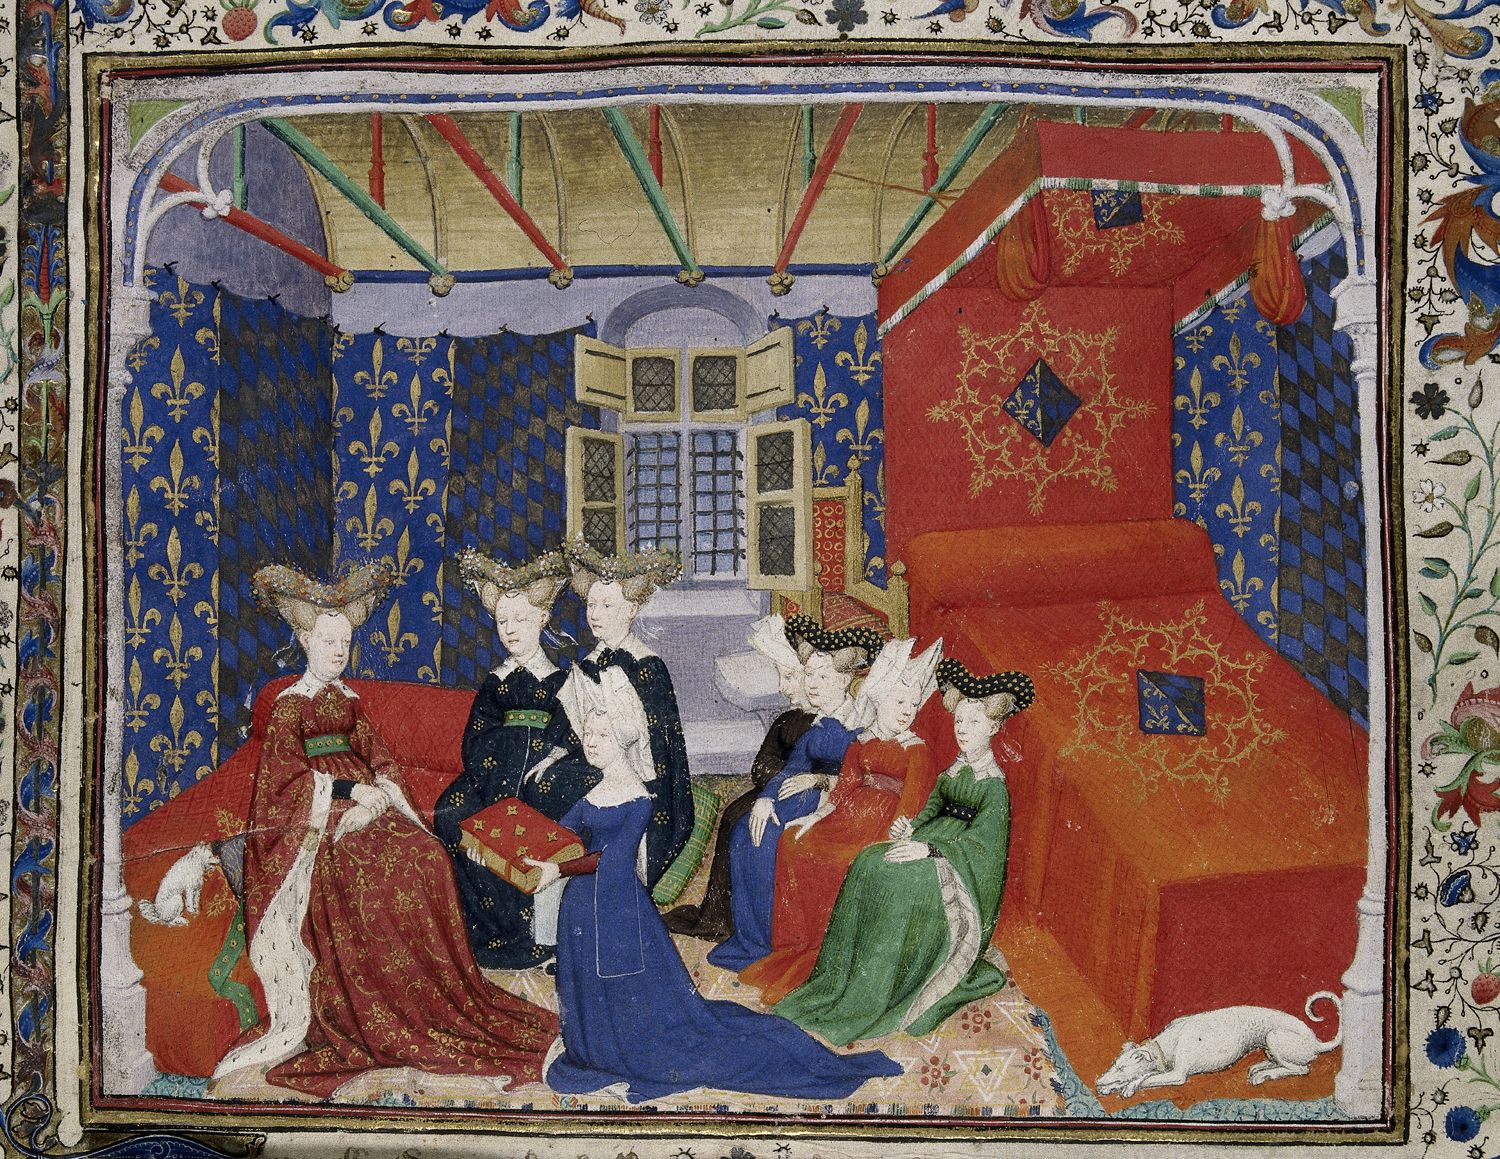 Christine de Pisan presenting her volume to Queen Isabeau of Bavaria (BL Harley 4431).